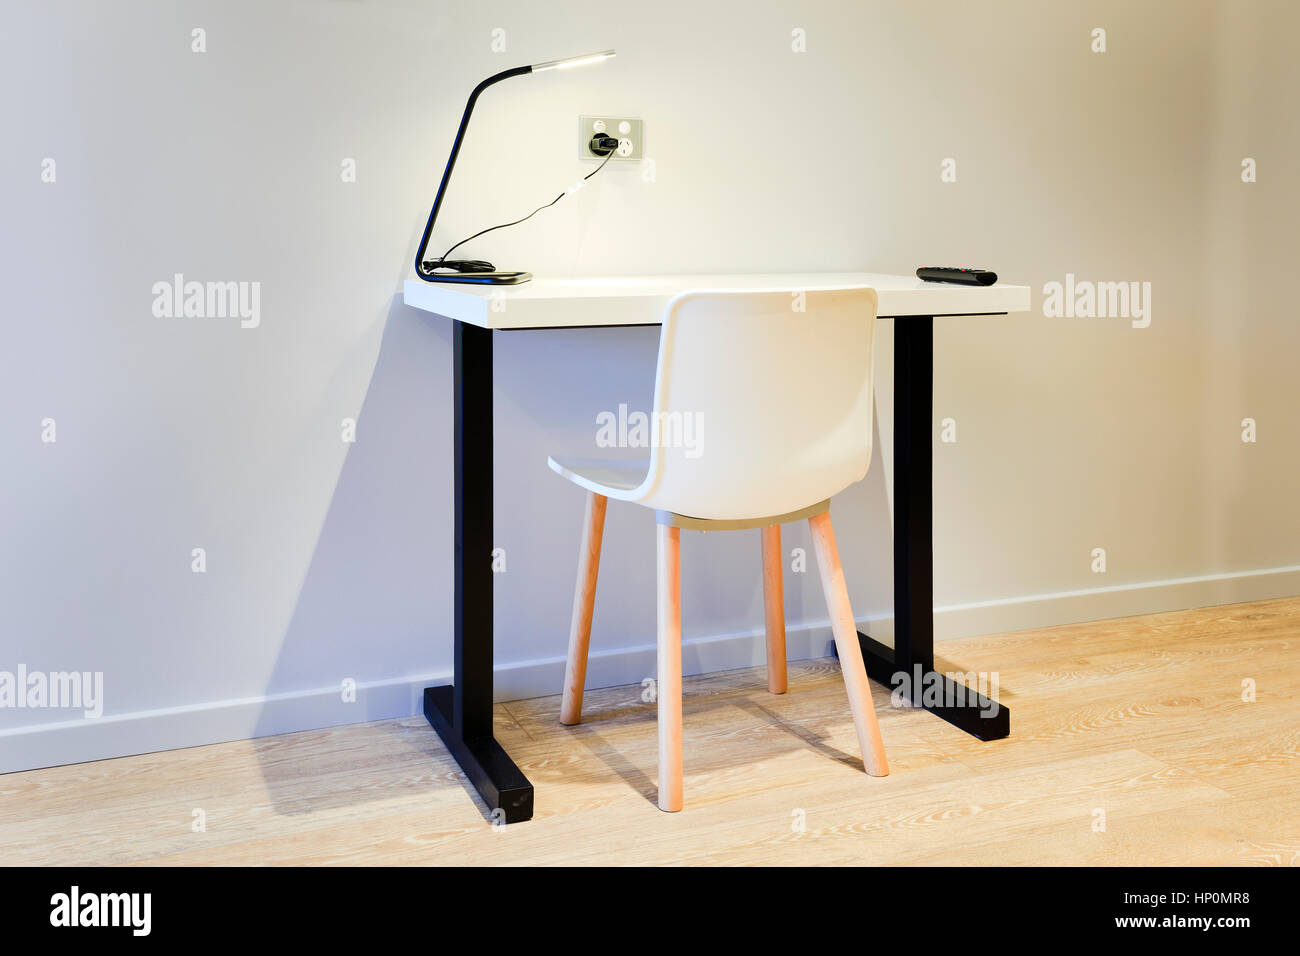 Single Modern Compact Study Computer Desk With Chair For Laptop